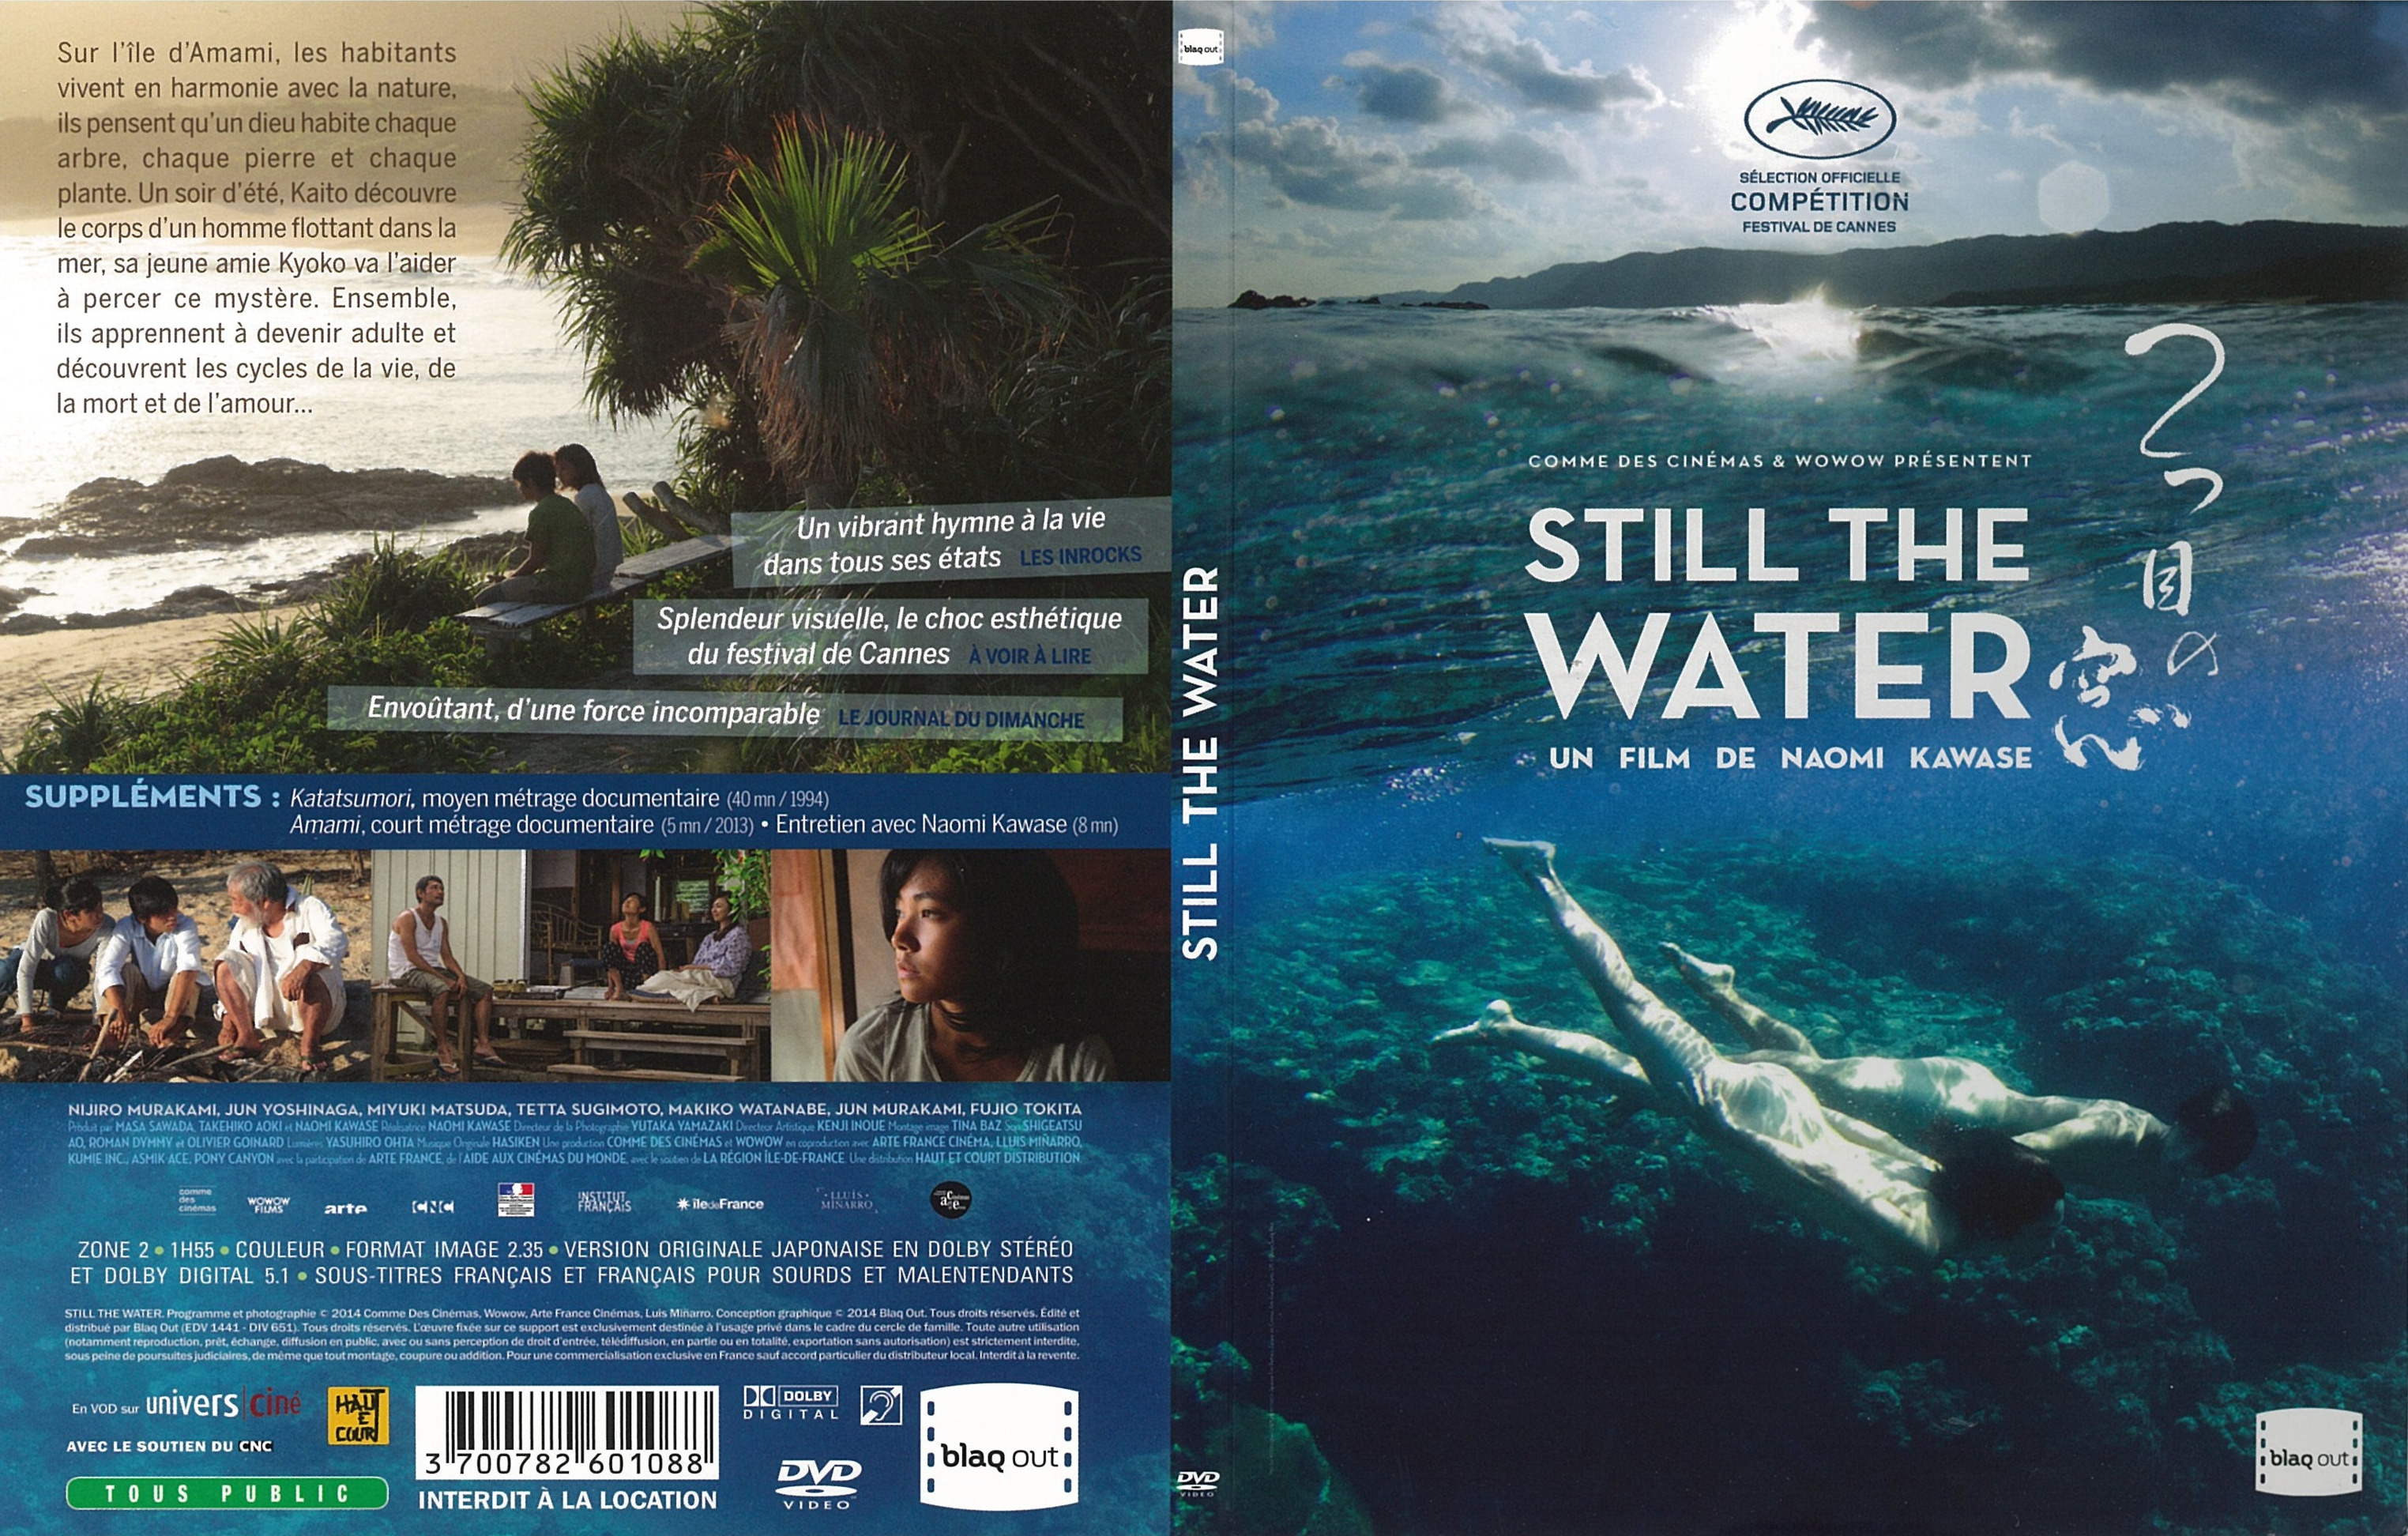 Jaquette DVD Still the Water